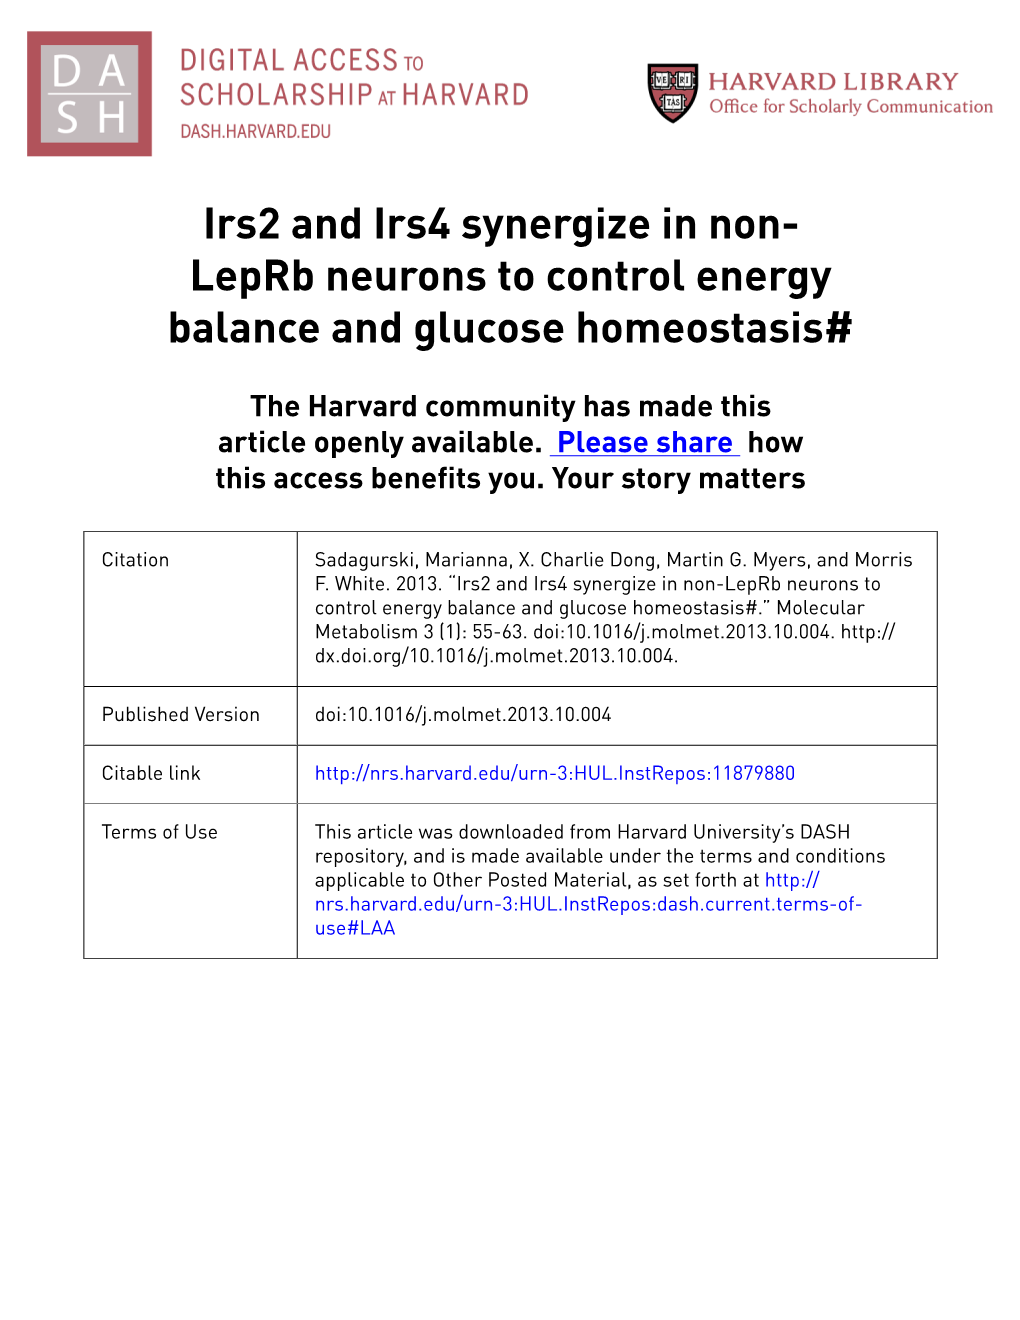 Irs2 and Irs4 Synergize in Non-Leprb Neurons to Control Energy Balance and Glucose Homeostasis#.” Molecular Metabolism 3 (1): 55-63